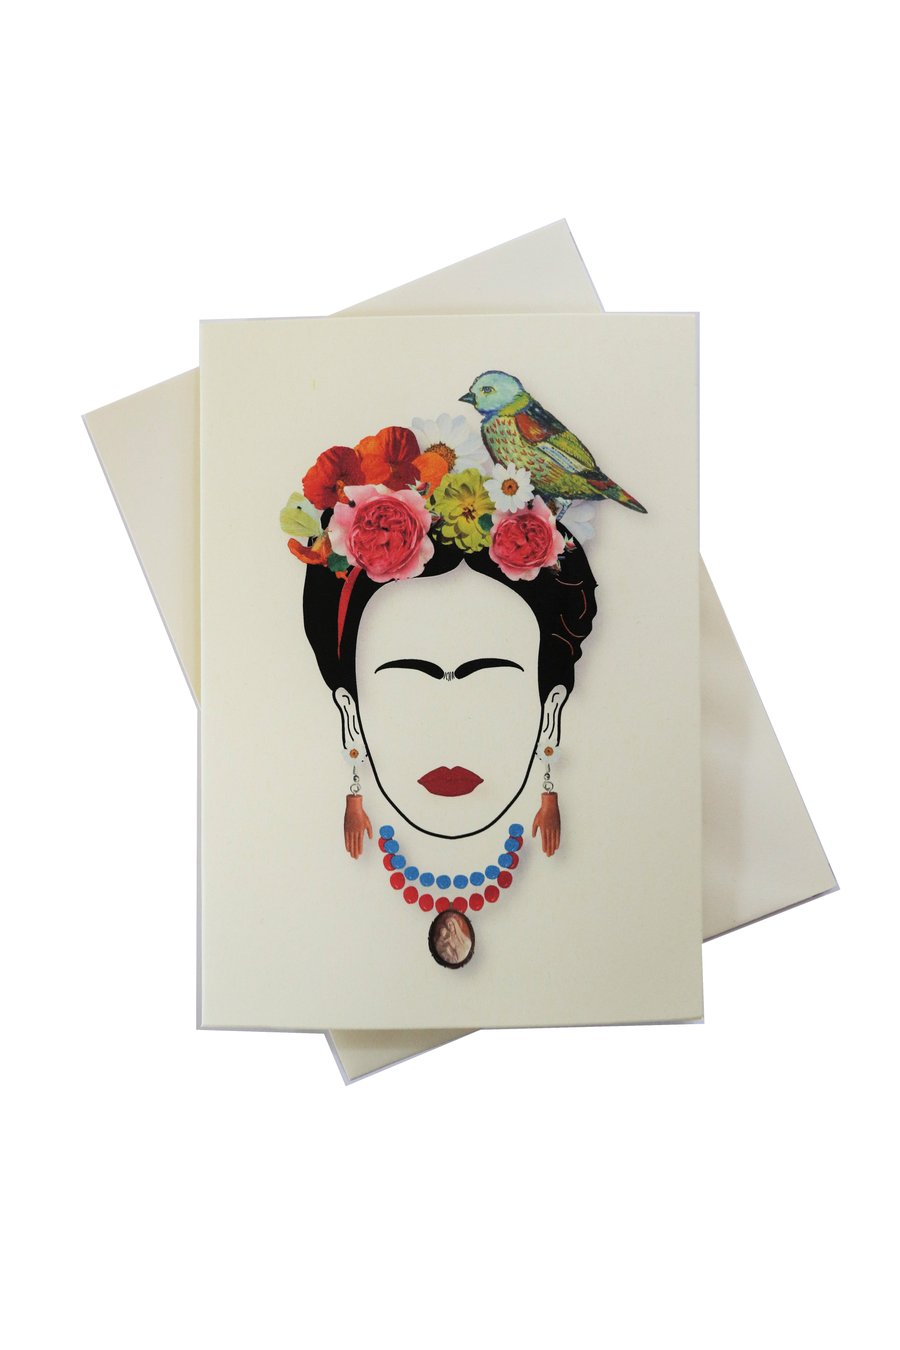 Greeting card - inspired by Frida kahlo - can frame for wall art